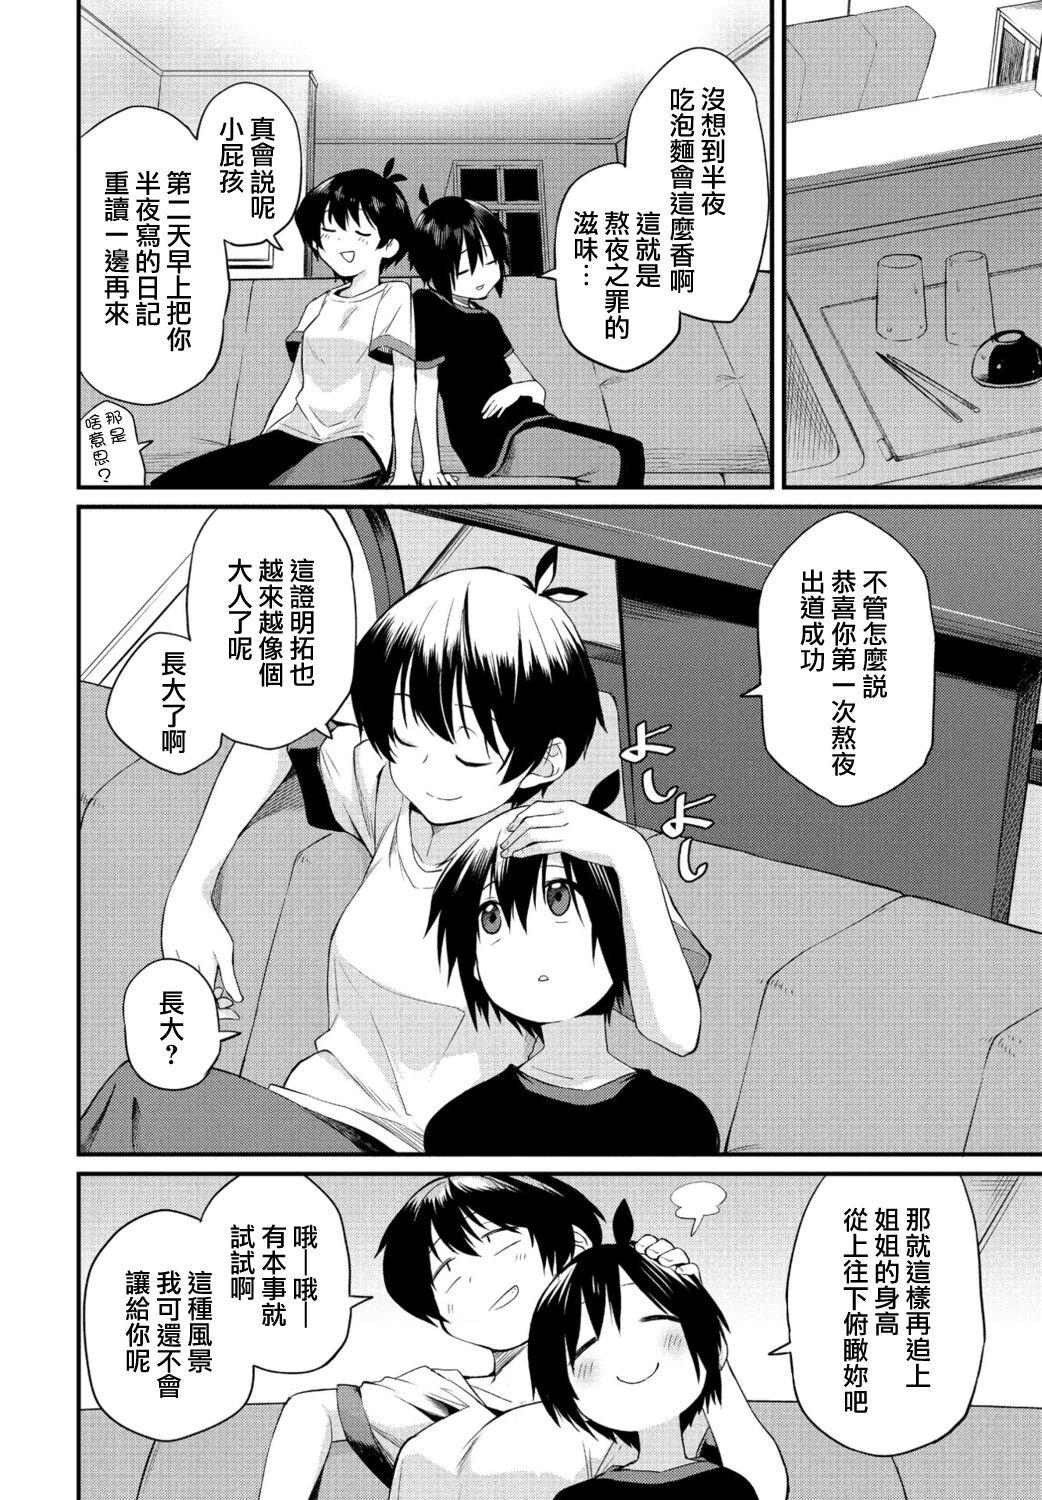 Music Kimagure Onee-chan 2 Perverted - Page 4